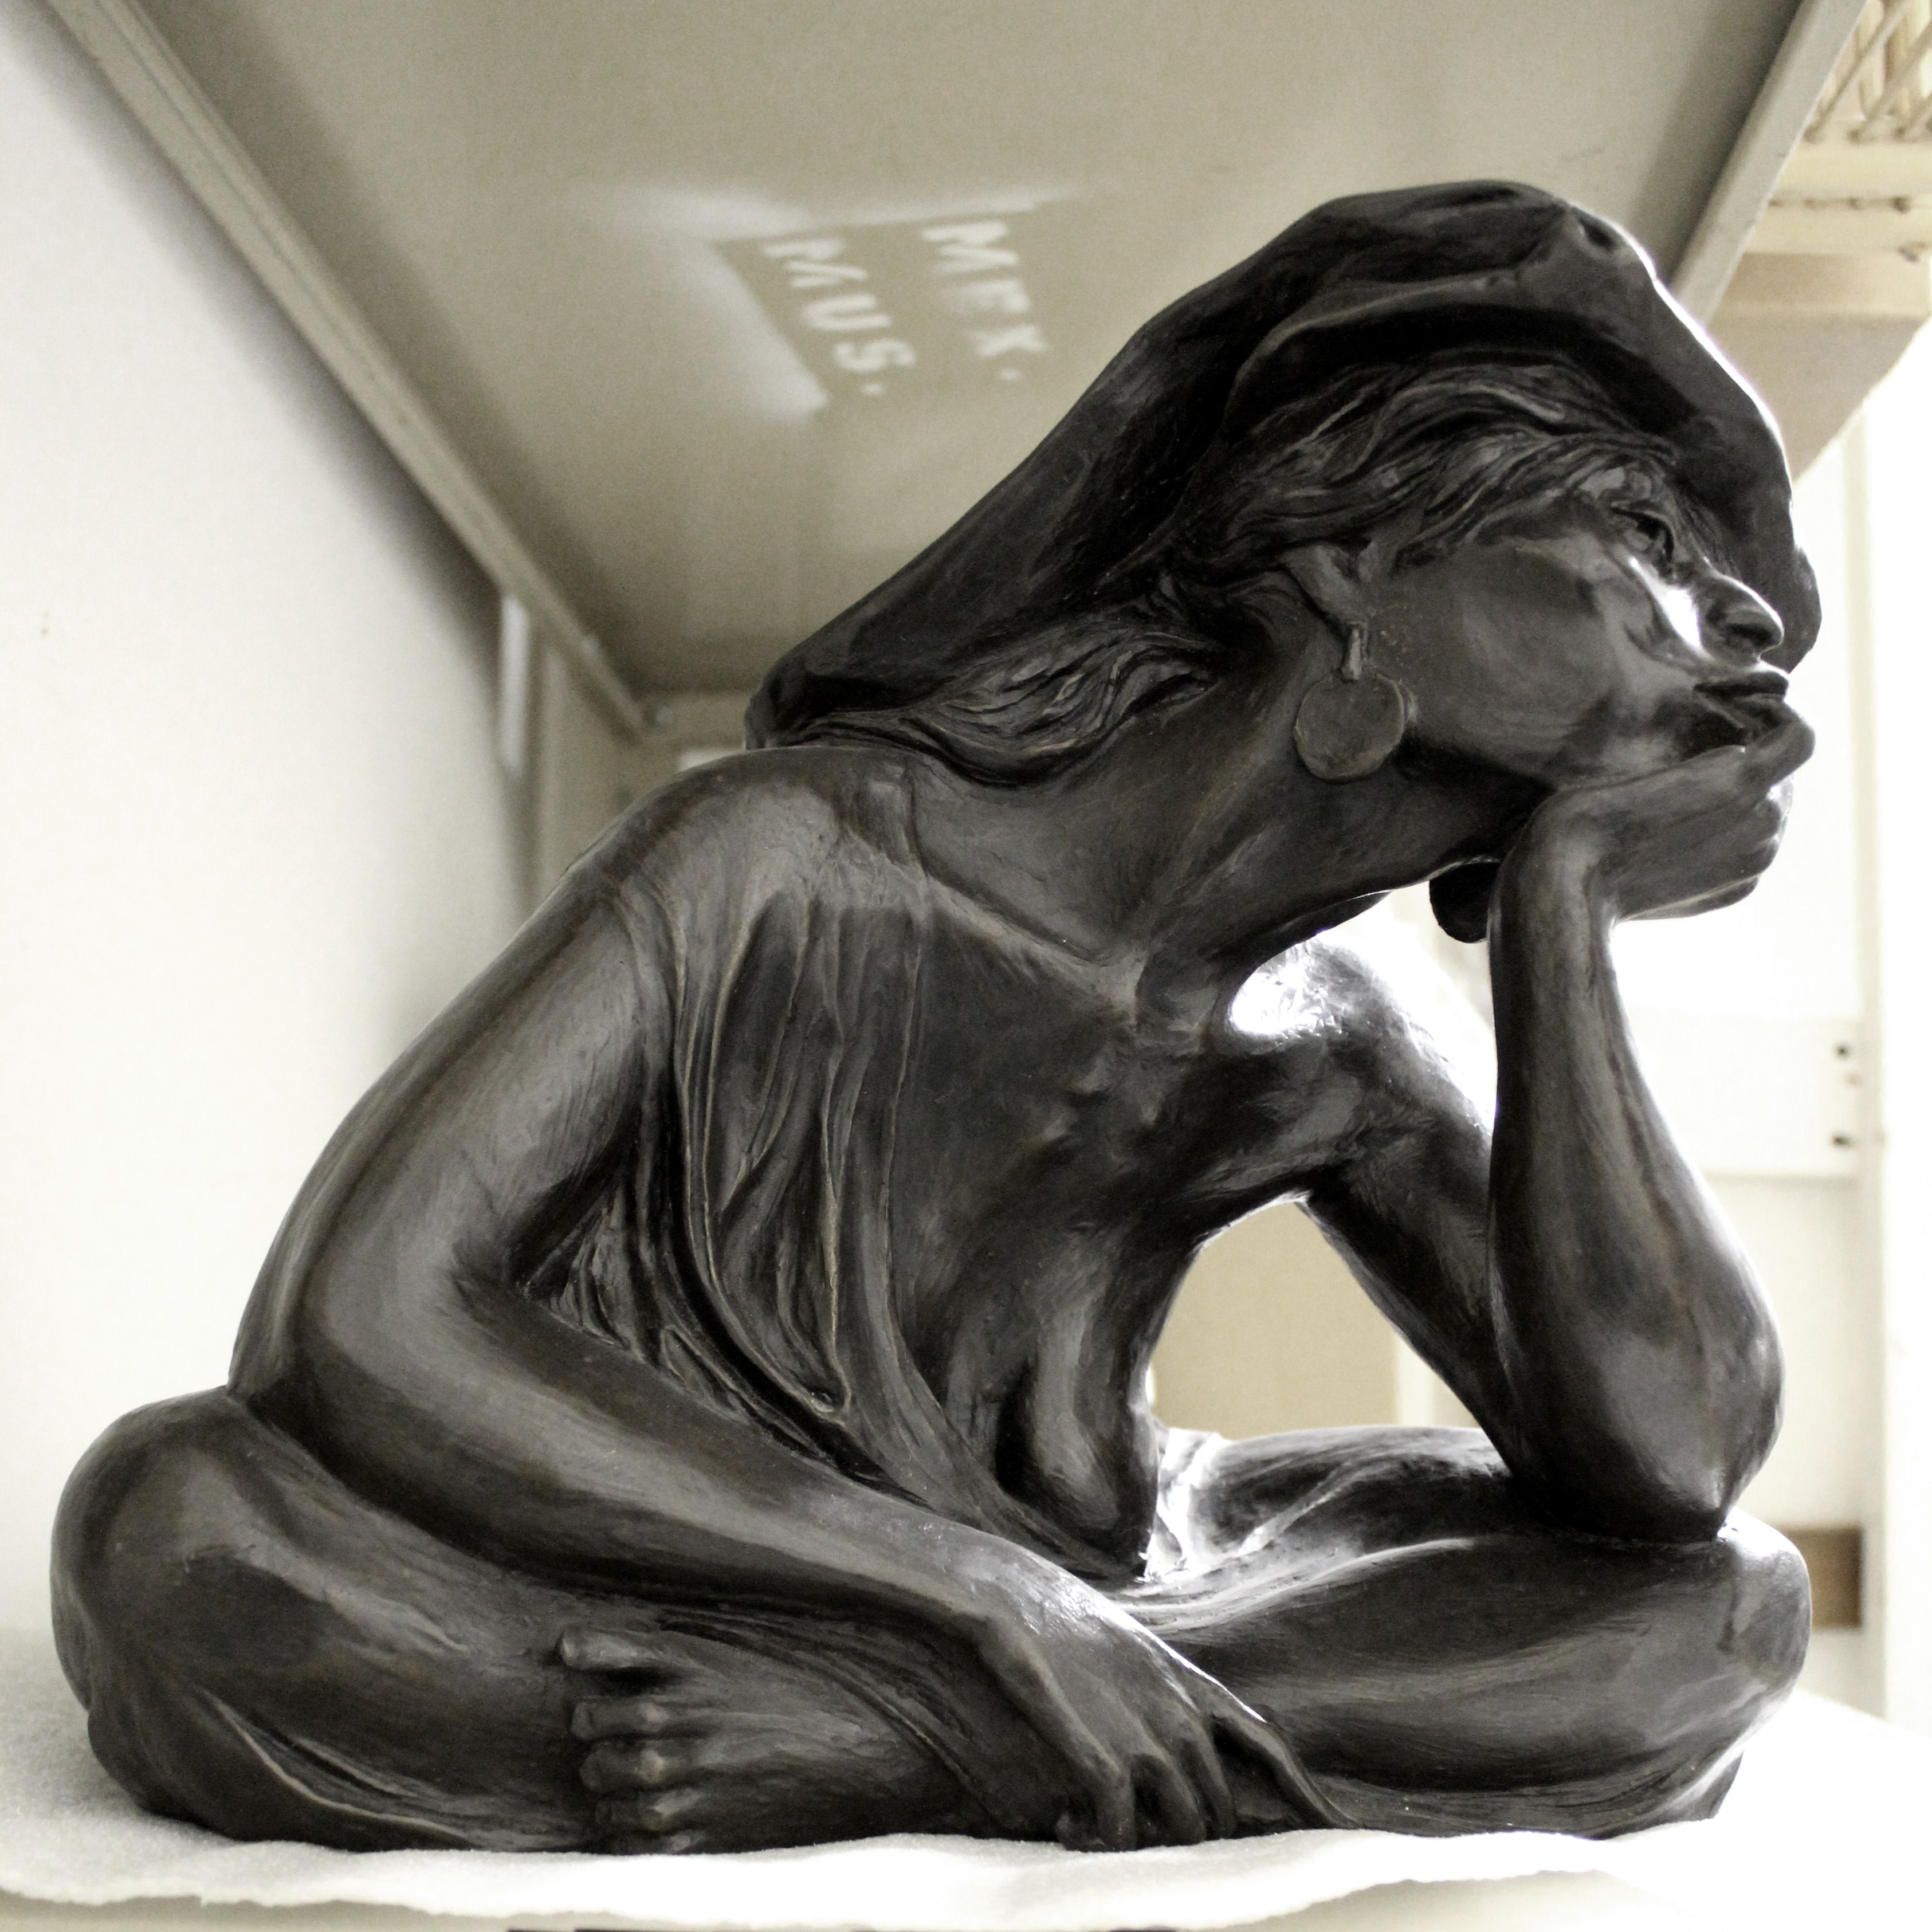 La Pensativa (The Thinker), c. 1979 (above) is one of the bronze works that is part of ¡Escultura!, and will be on display at USF from Feb. 3-Dec. 12. This exhibition is FREE and open to all.